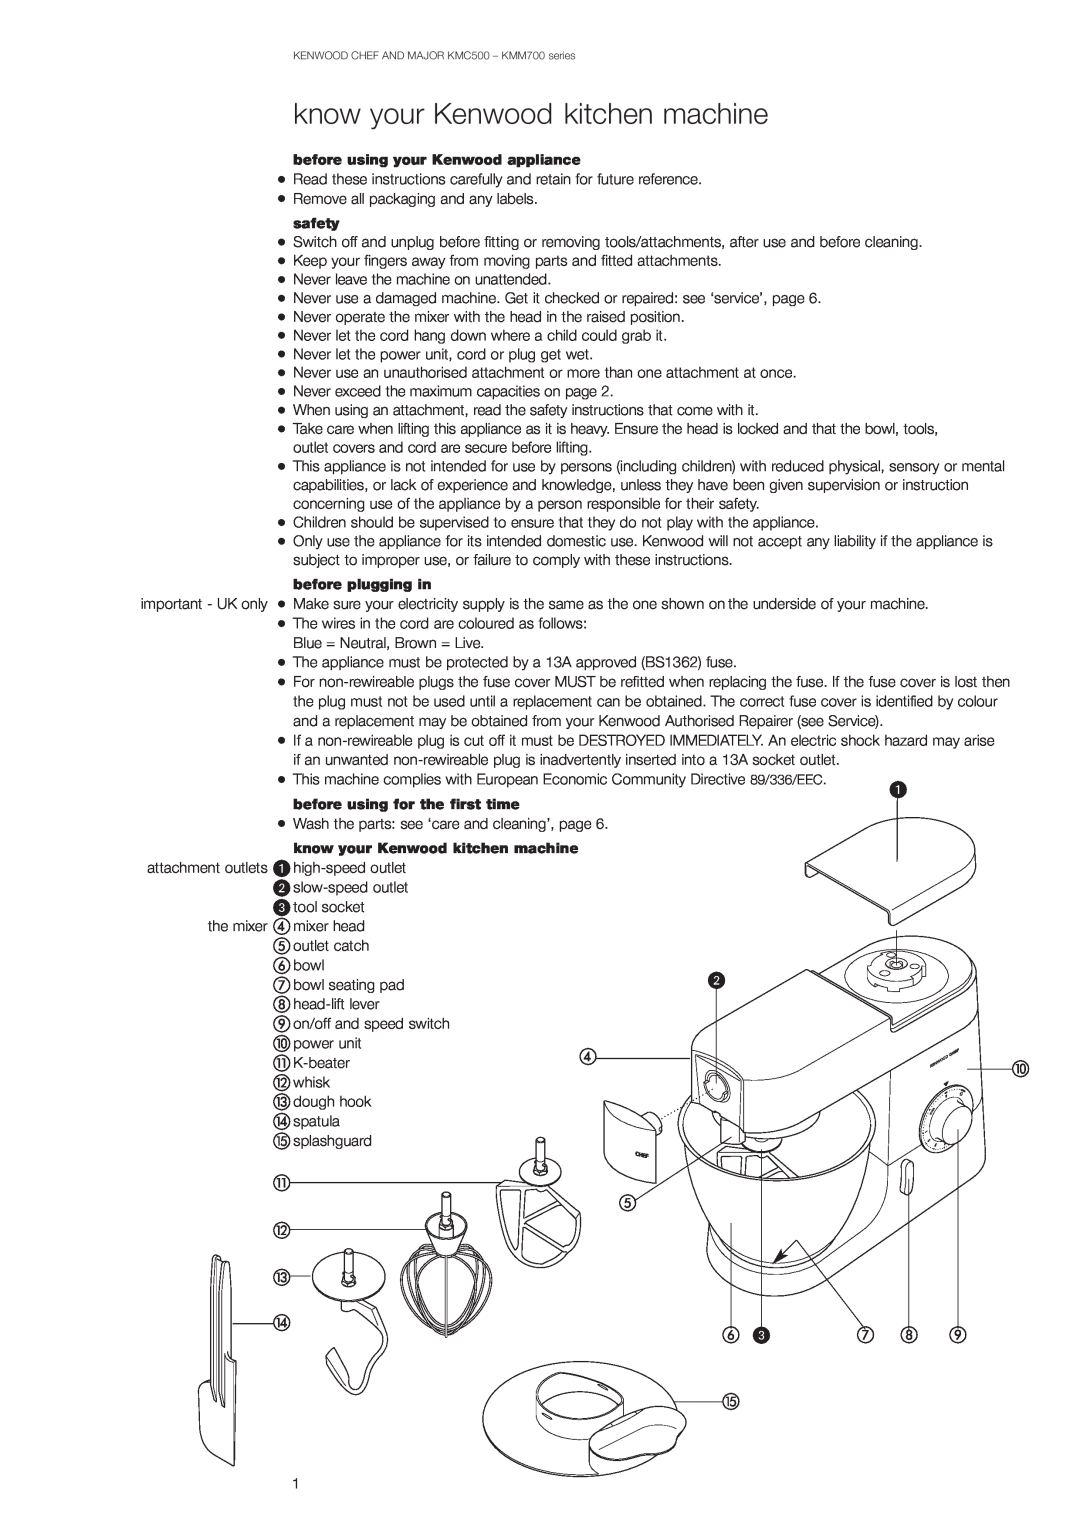 Kenwood KMC500 Series manual know your Kenwood kitchen machine, before using your Kenwood appliance, before plugging in 